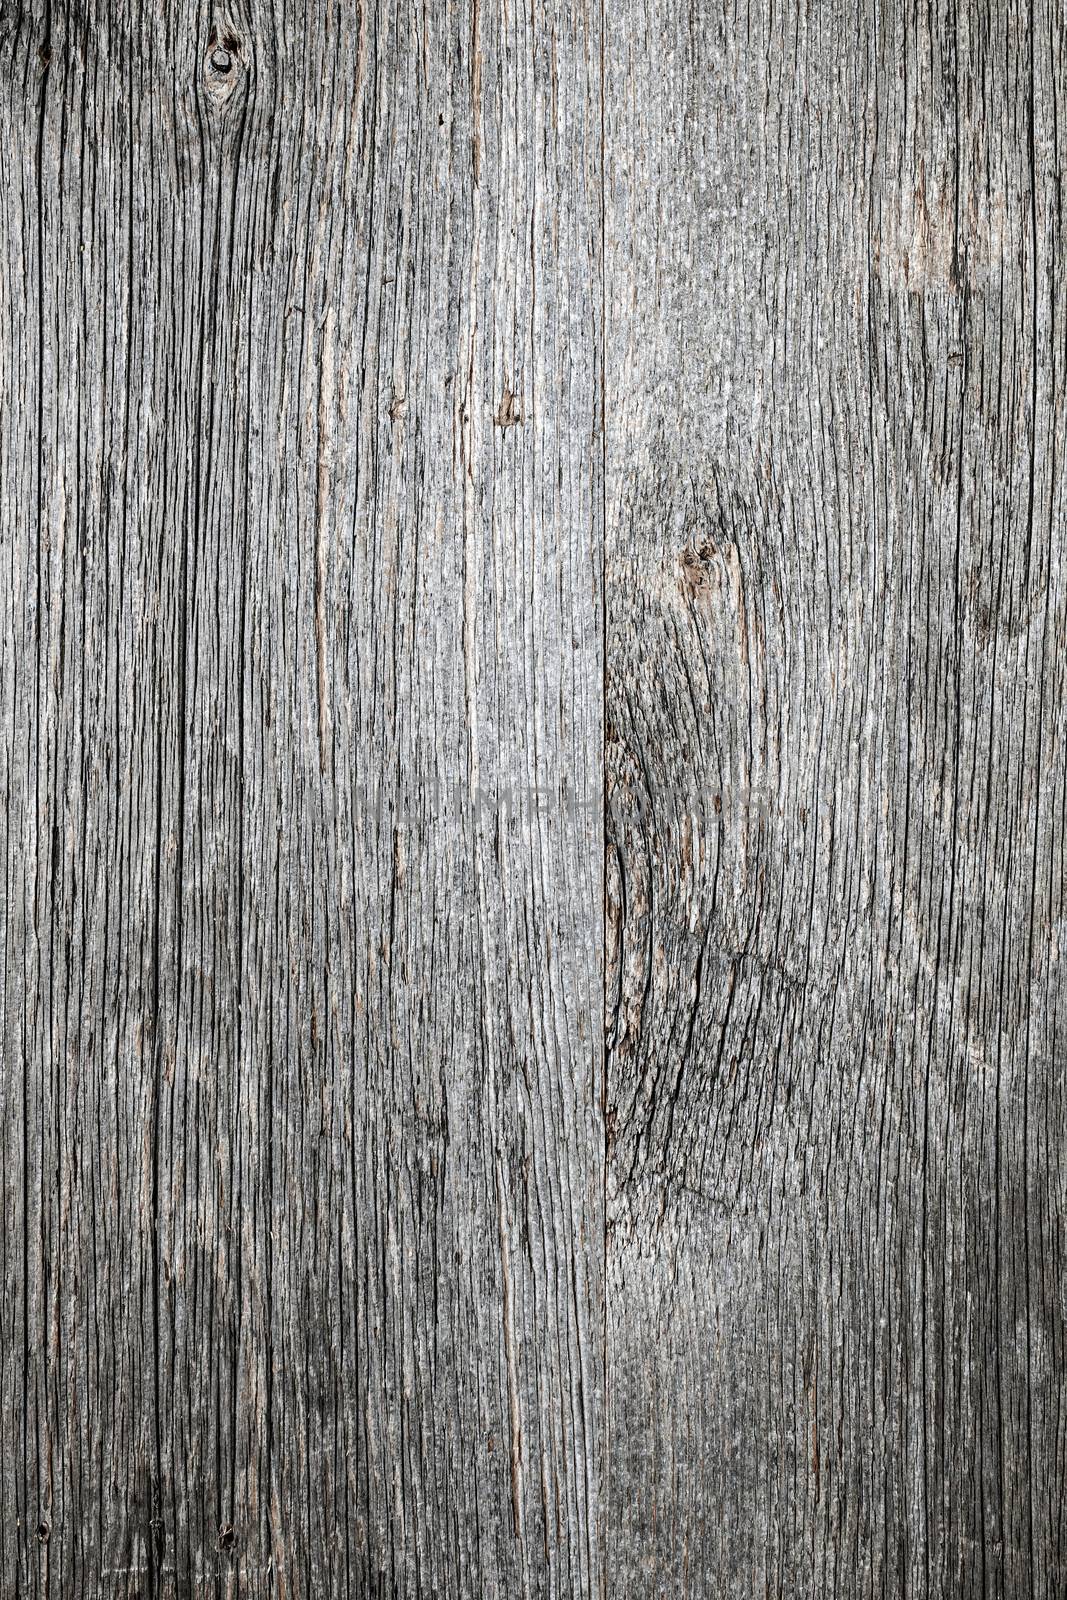 Weathered distressed rustic barn wood as textured background